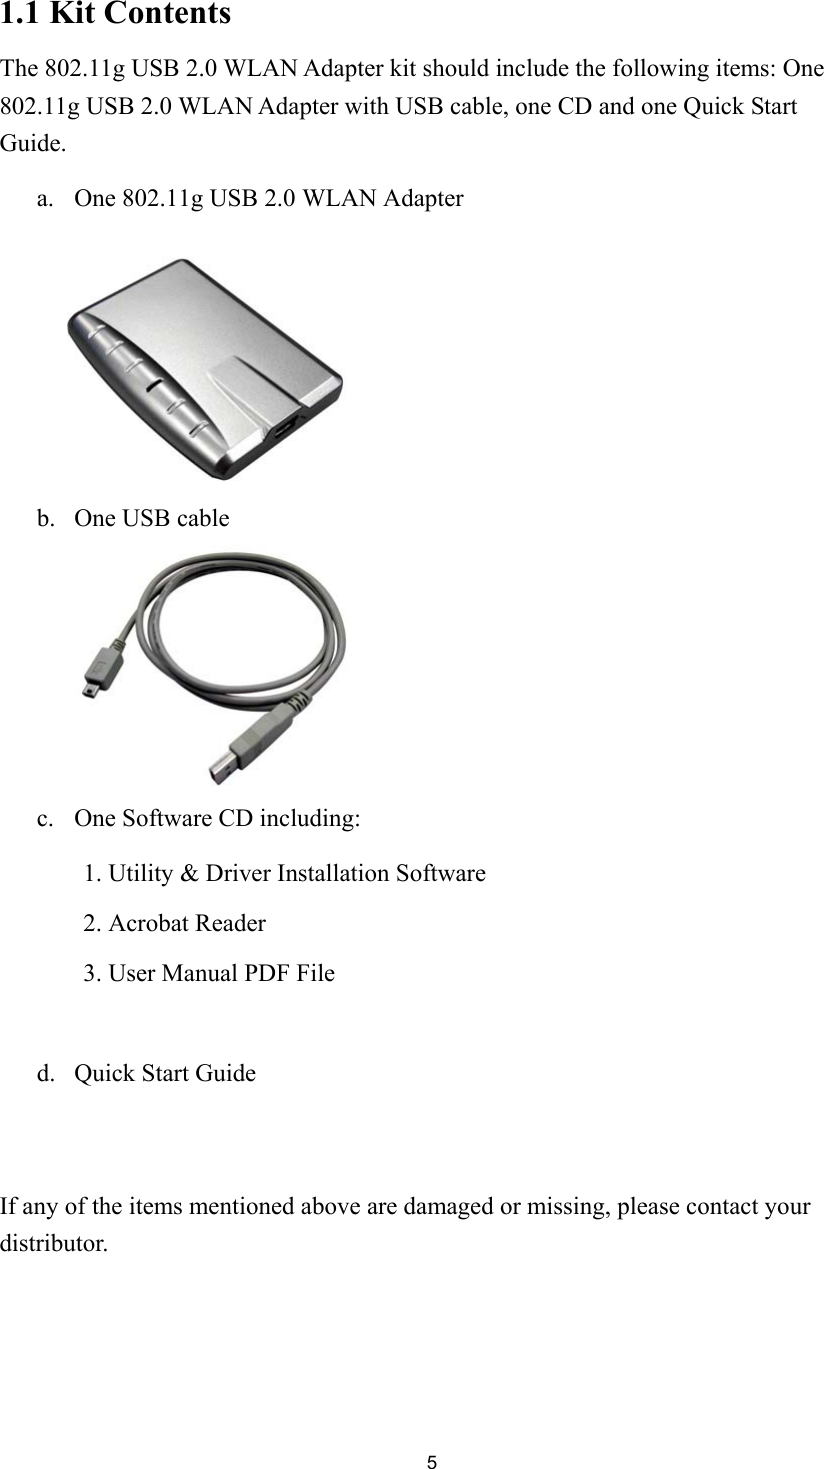 51.1 Kit ContentsThe 802.11g USB 2.0 WLAN Adapter kit should include the following items: One802.11g USB 2.0 WLAN Adapter with USB cable, one CD and one Quick StartGuide.a. One 802.11g USB 2.0 WLAN Adapterb. One USB cable   c. One Software CD including:1. Utility &amp; Driver Installation Software2. Acrobat Reader3. User Manual PDF Filed. Quick Start GuideIf any of the items mentioned above are damaged or missing, please contact yourdistributor.